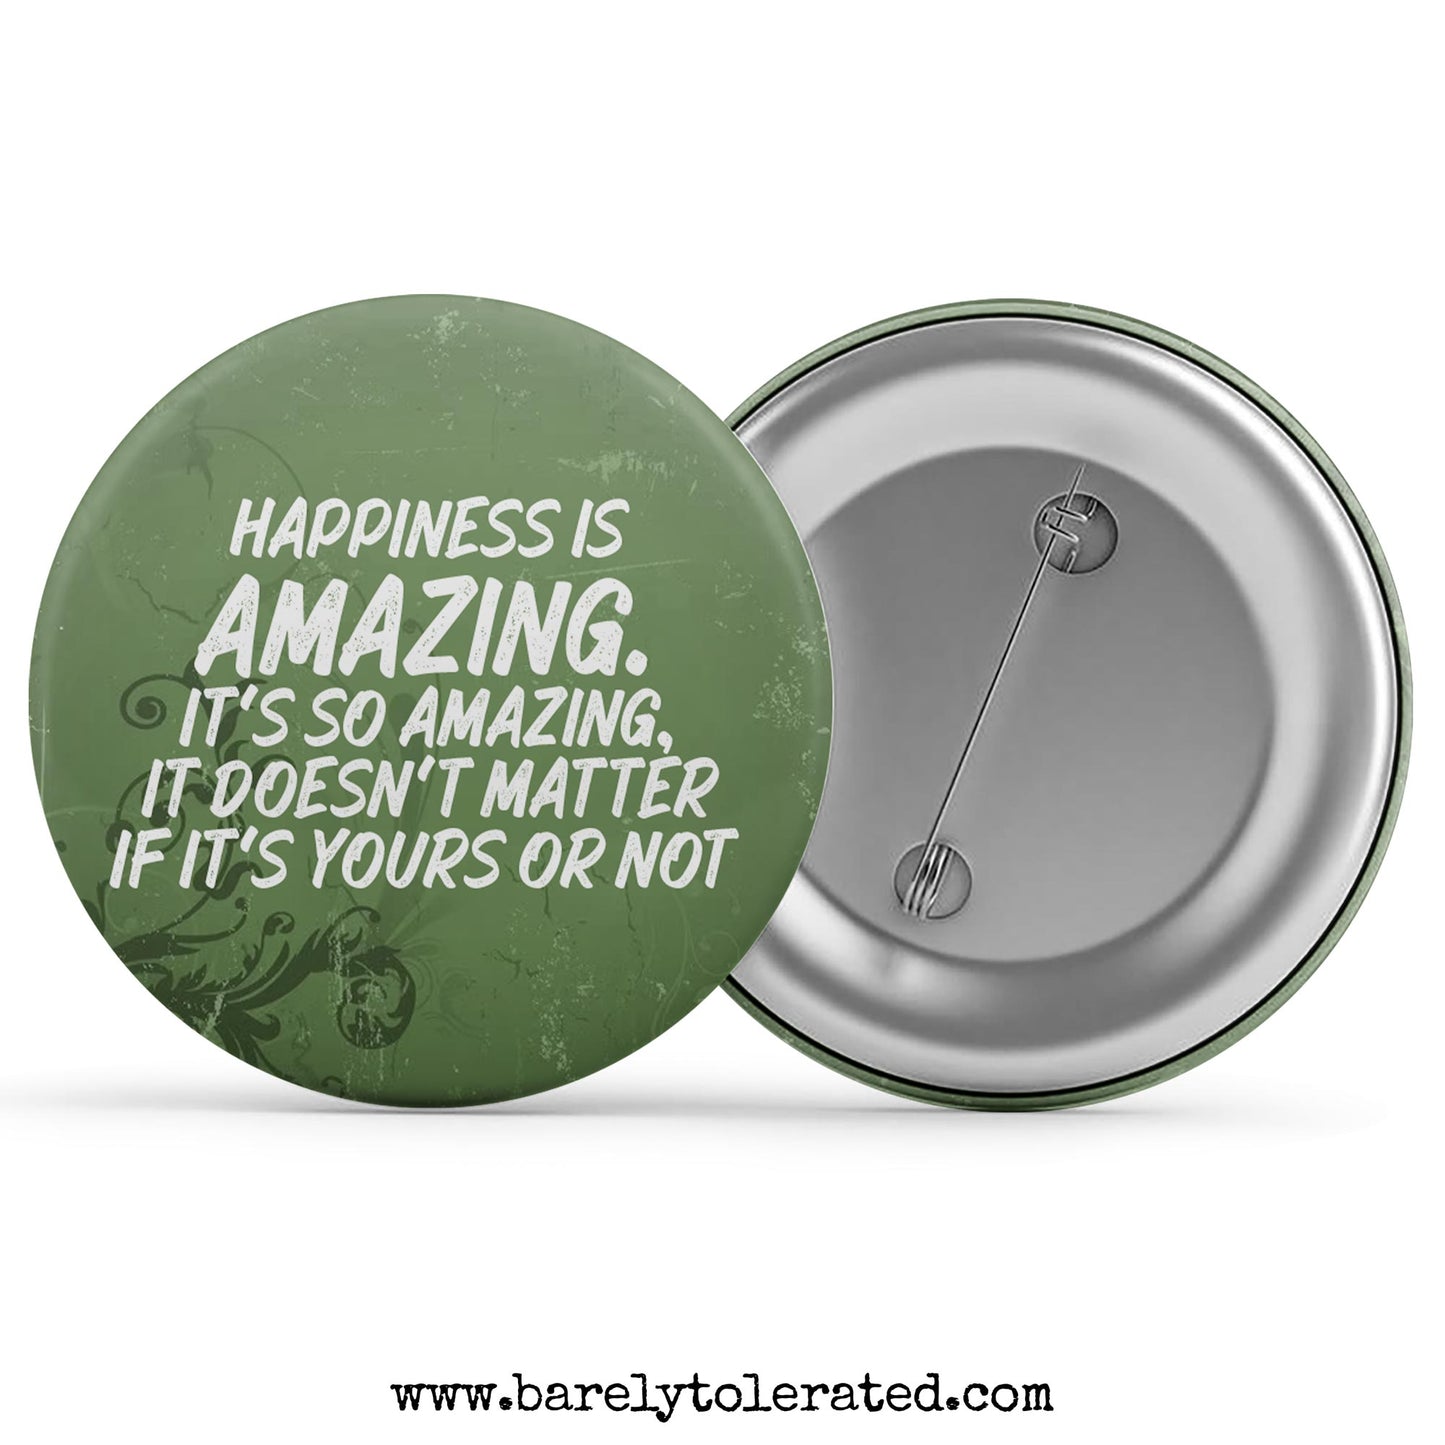 Happiness Is Amazing, It Doesn't Matter If It's Yours Or Not